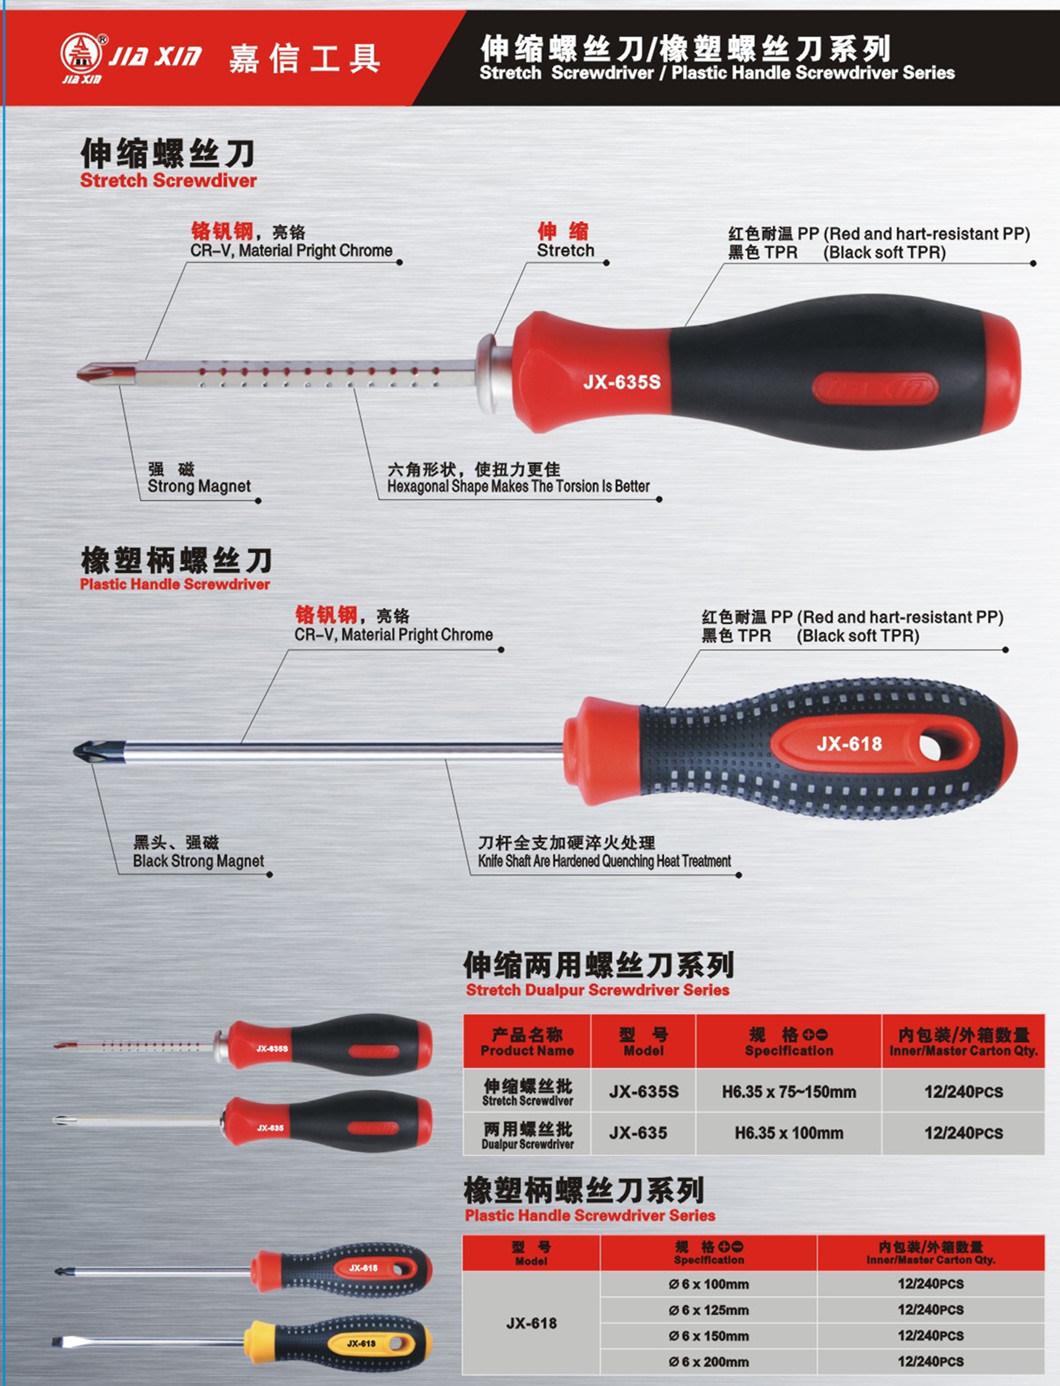 High Torque Screwdriver with Added Torque Holes